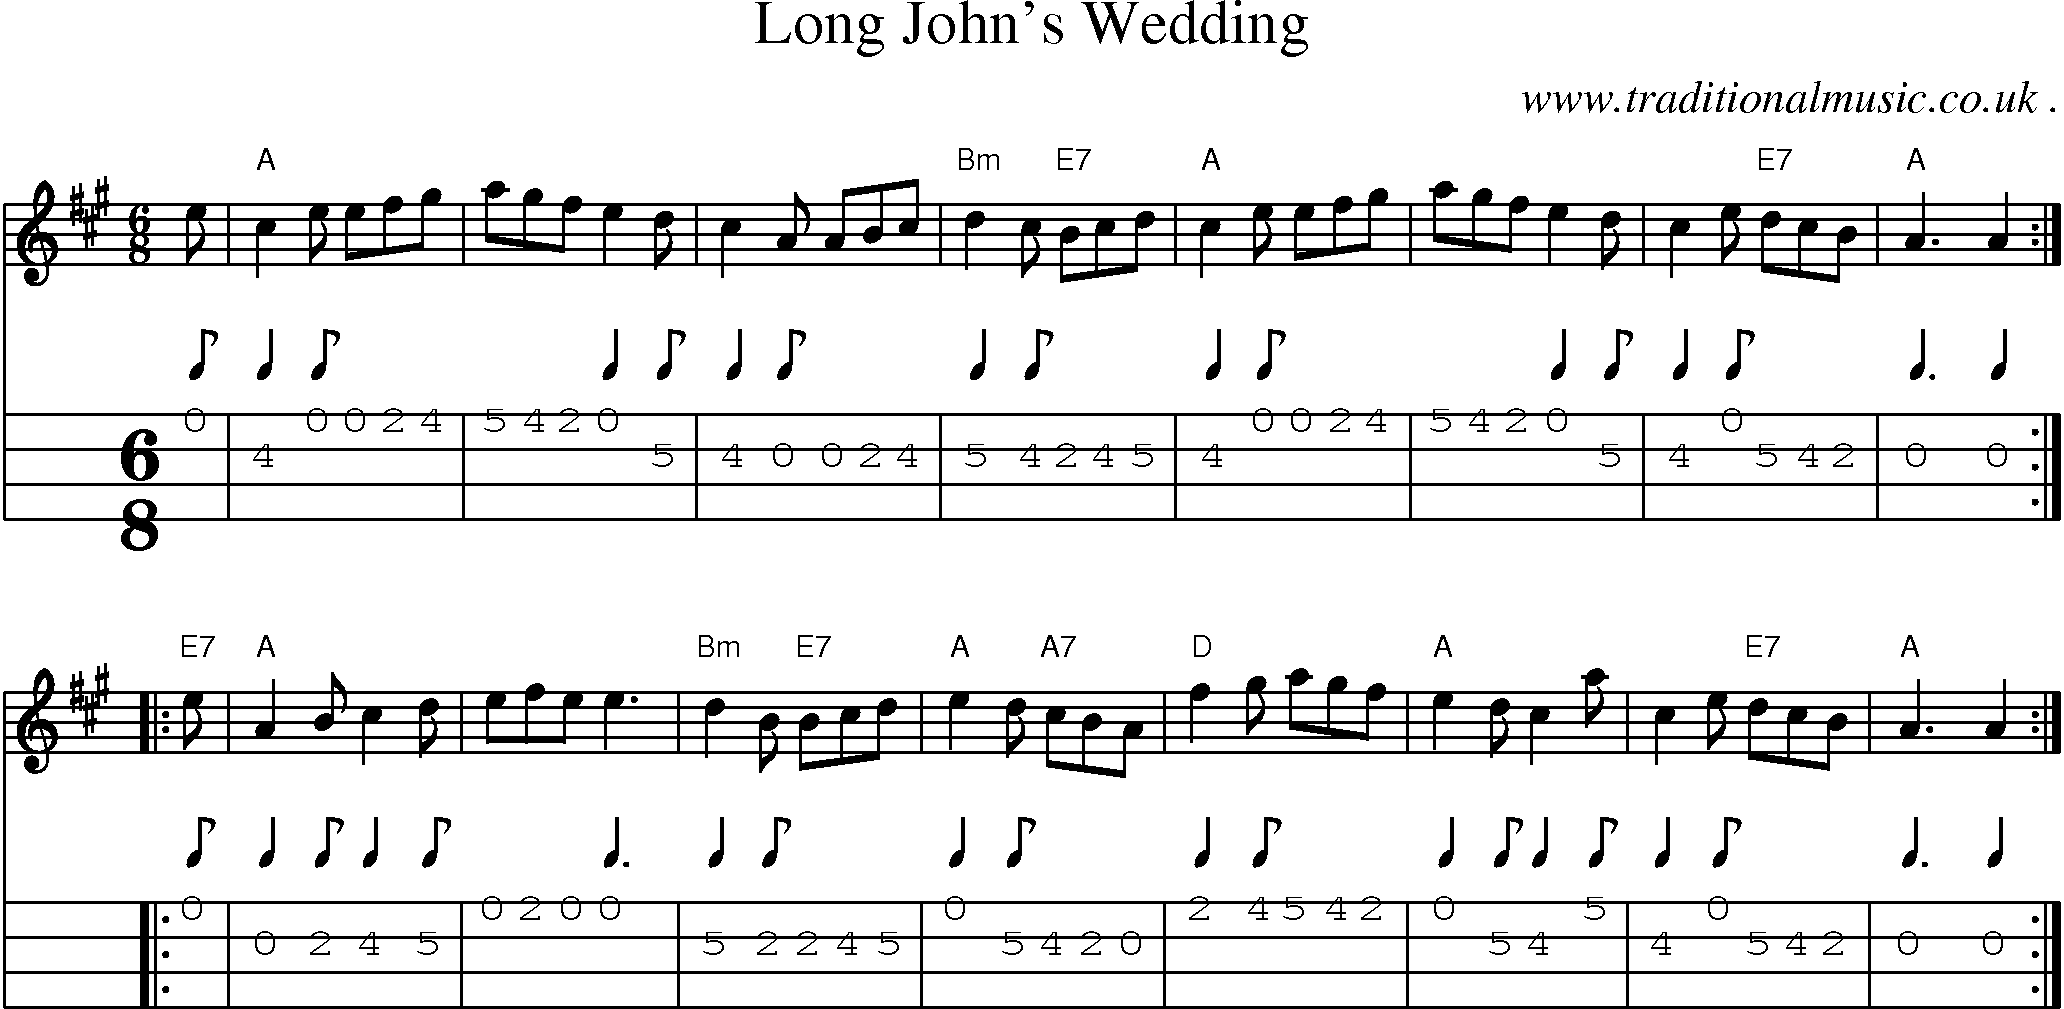 Sheet-music  score, Chords and Mandolin Tabs for Long Johns Wedding